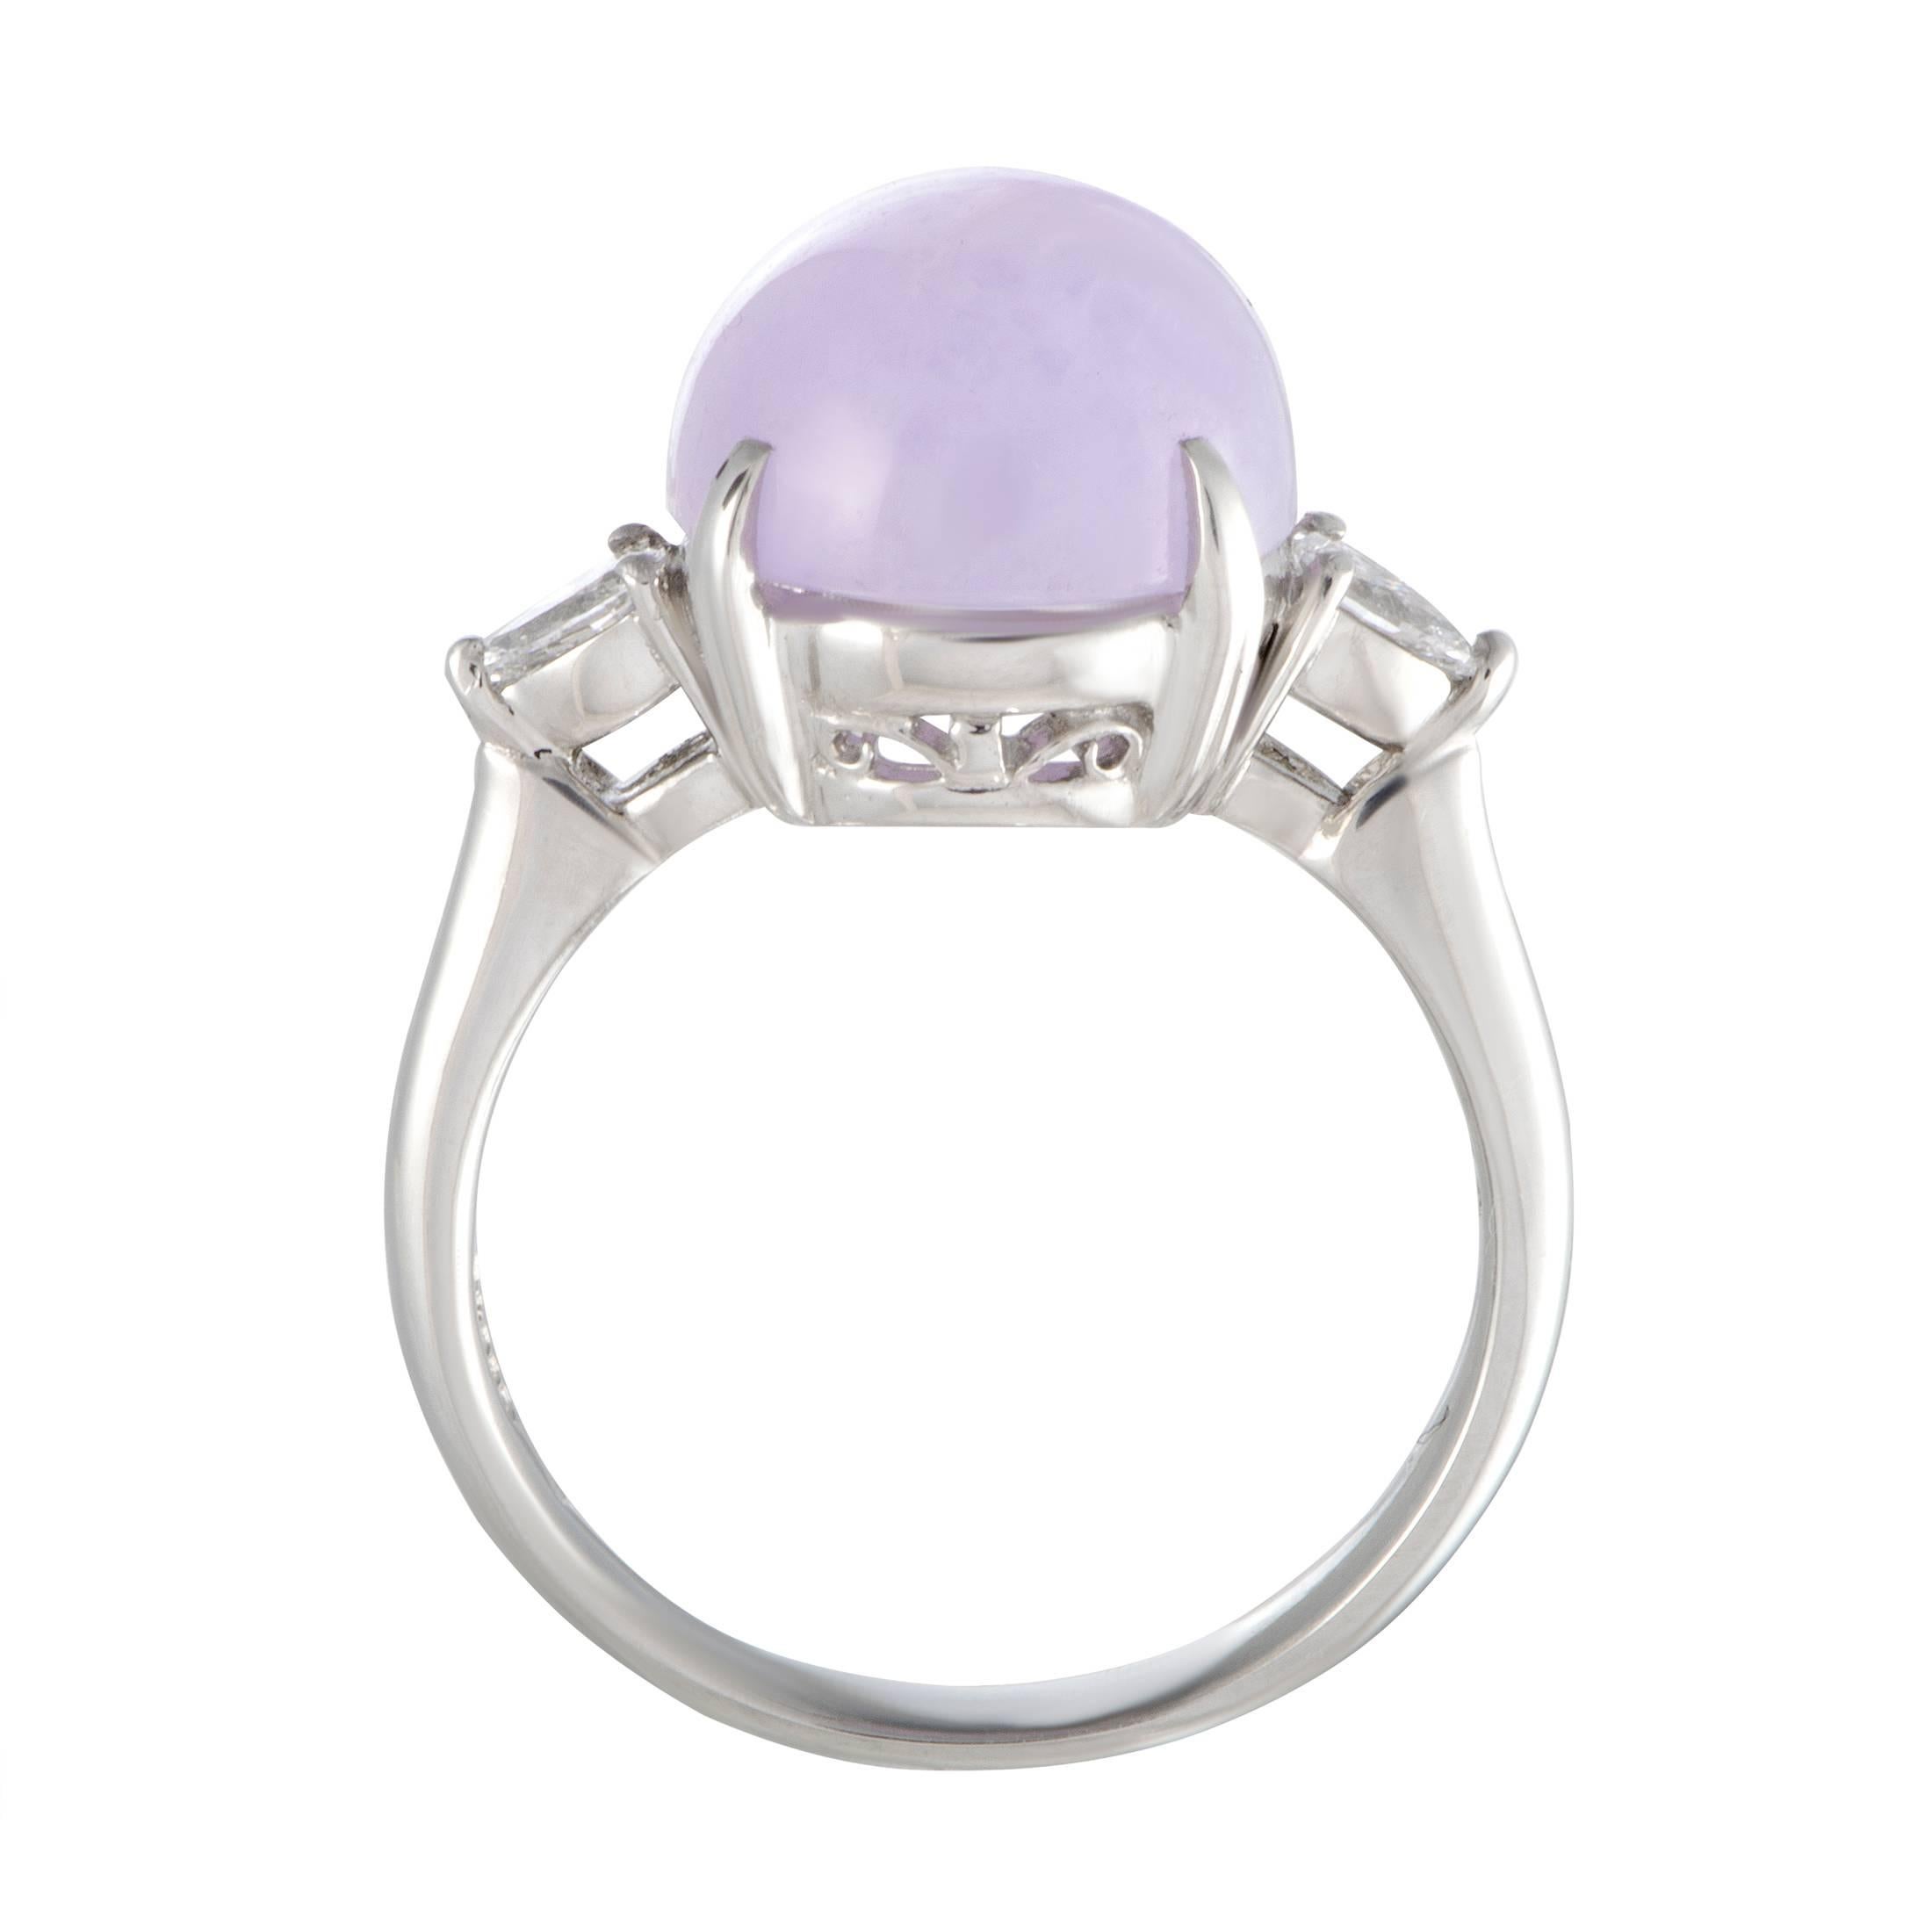 The elegant platinum presents the perfect backdrop for the sublime purple jade in this gorgeous ring that offers stylish, prestigious appearance. The jade weighs 9.40 carats and it is accompanied by 0.22 carats of scintillating diamonds.
Ring Size: